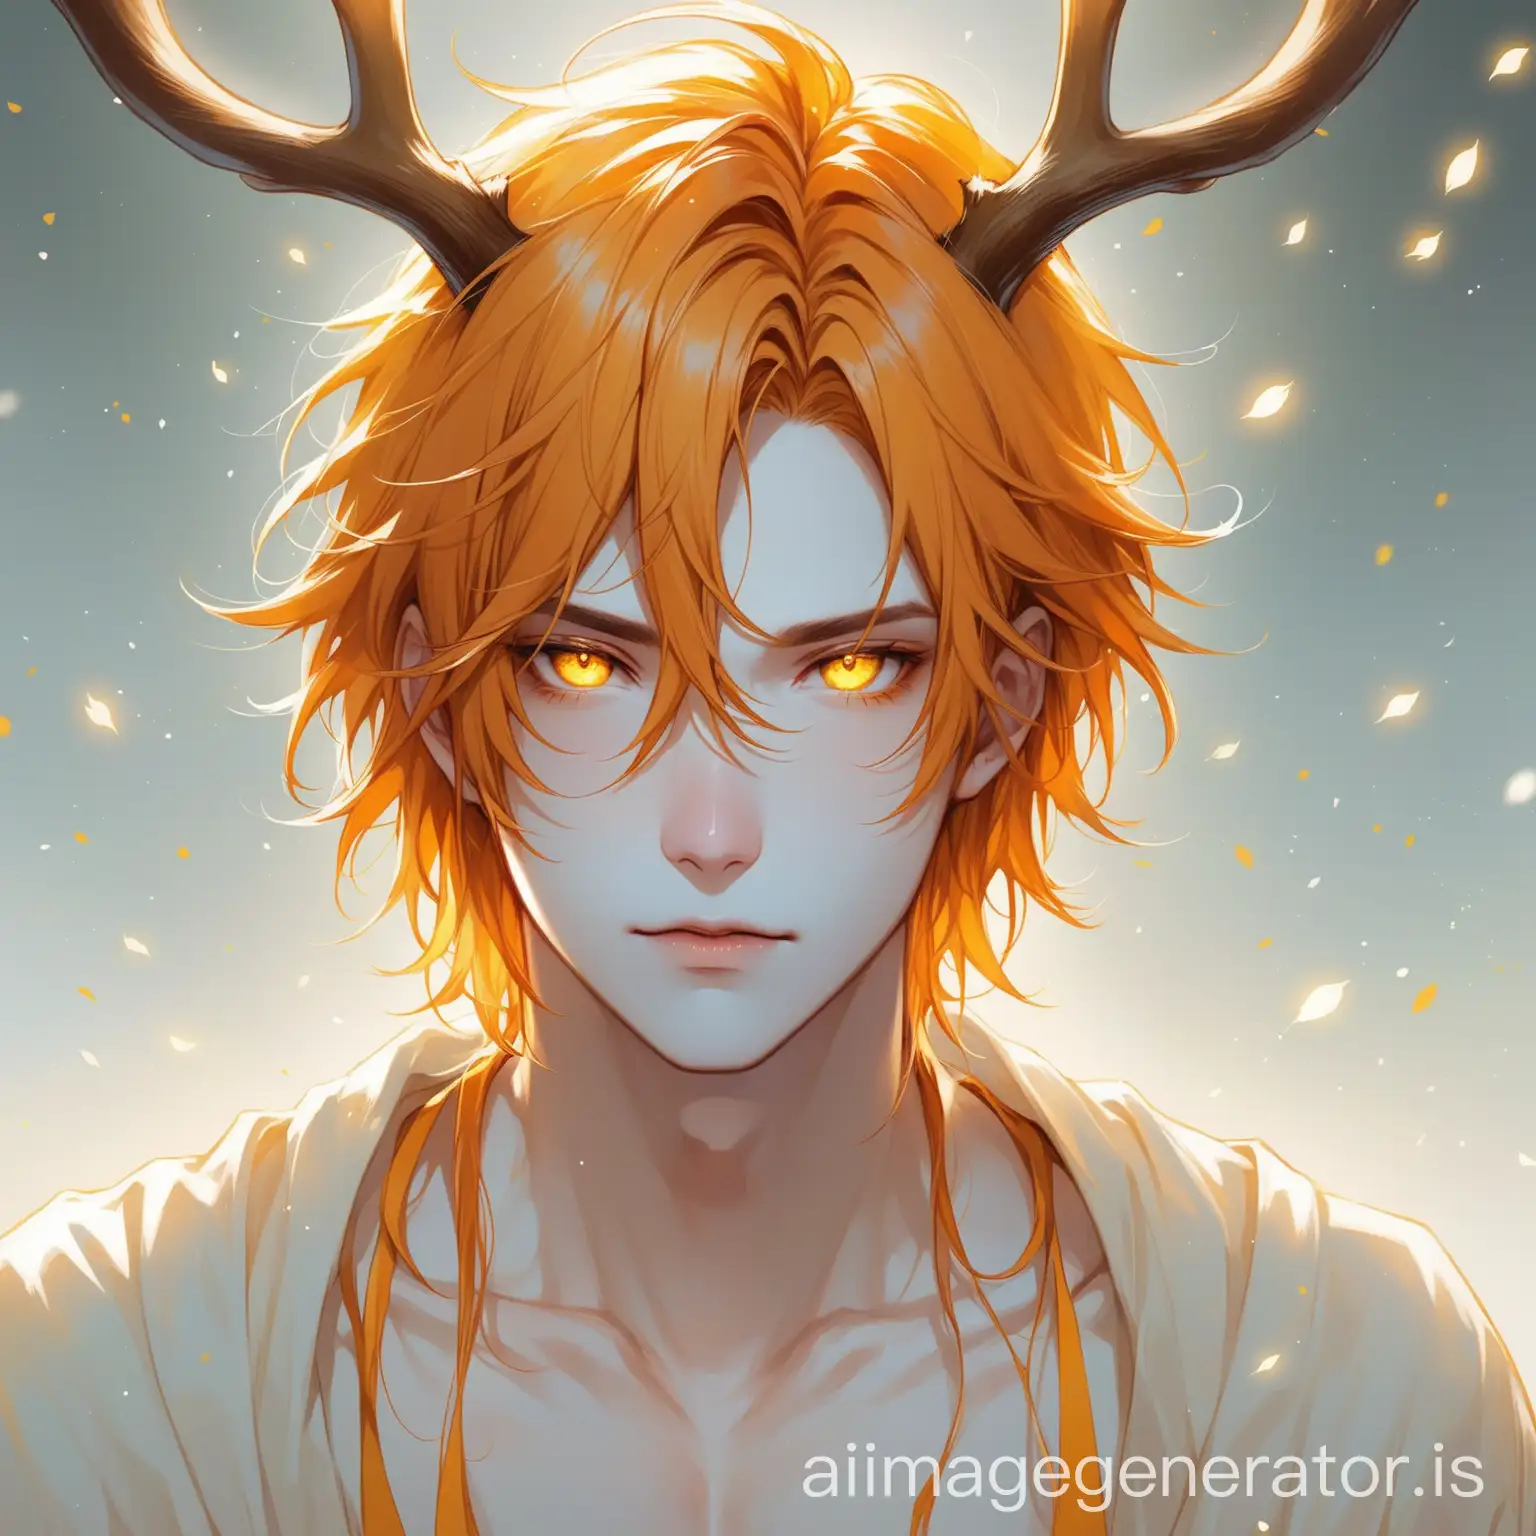 Ethereal-Male-with-Striking-Yellow-Eyes-and-Antlers